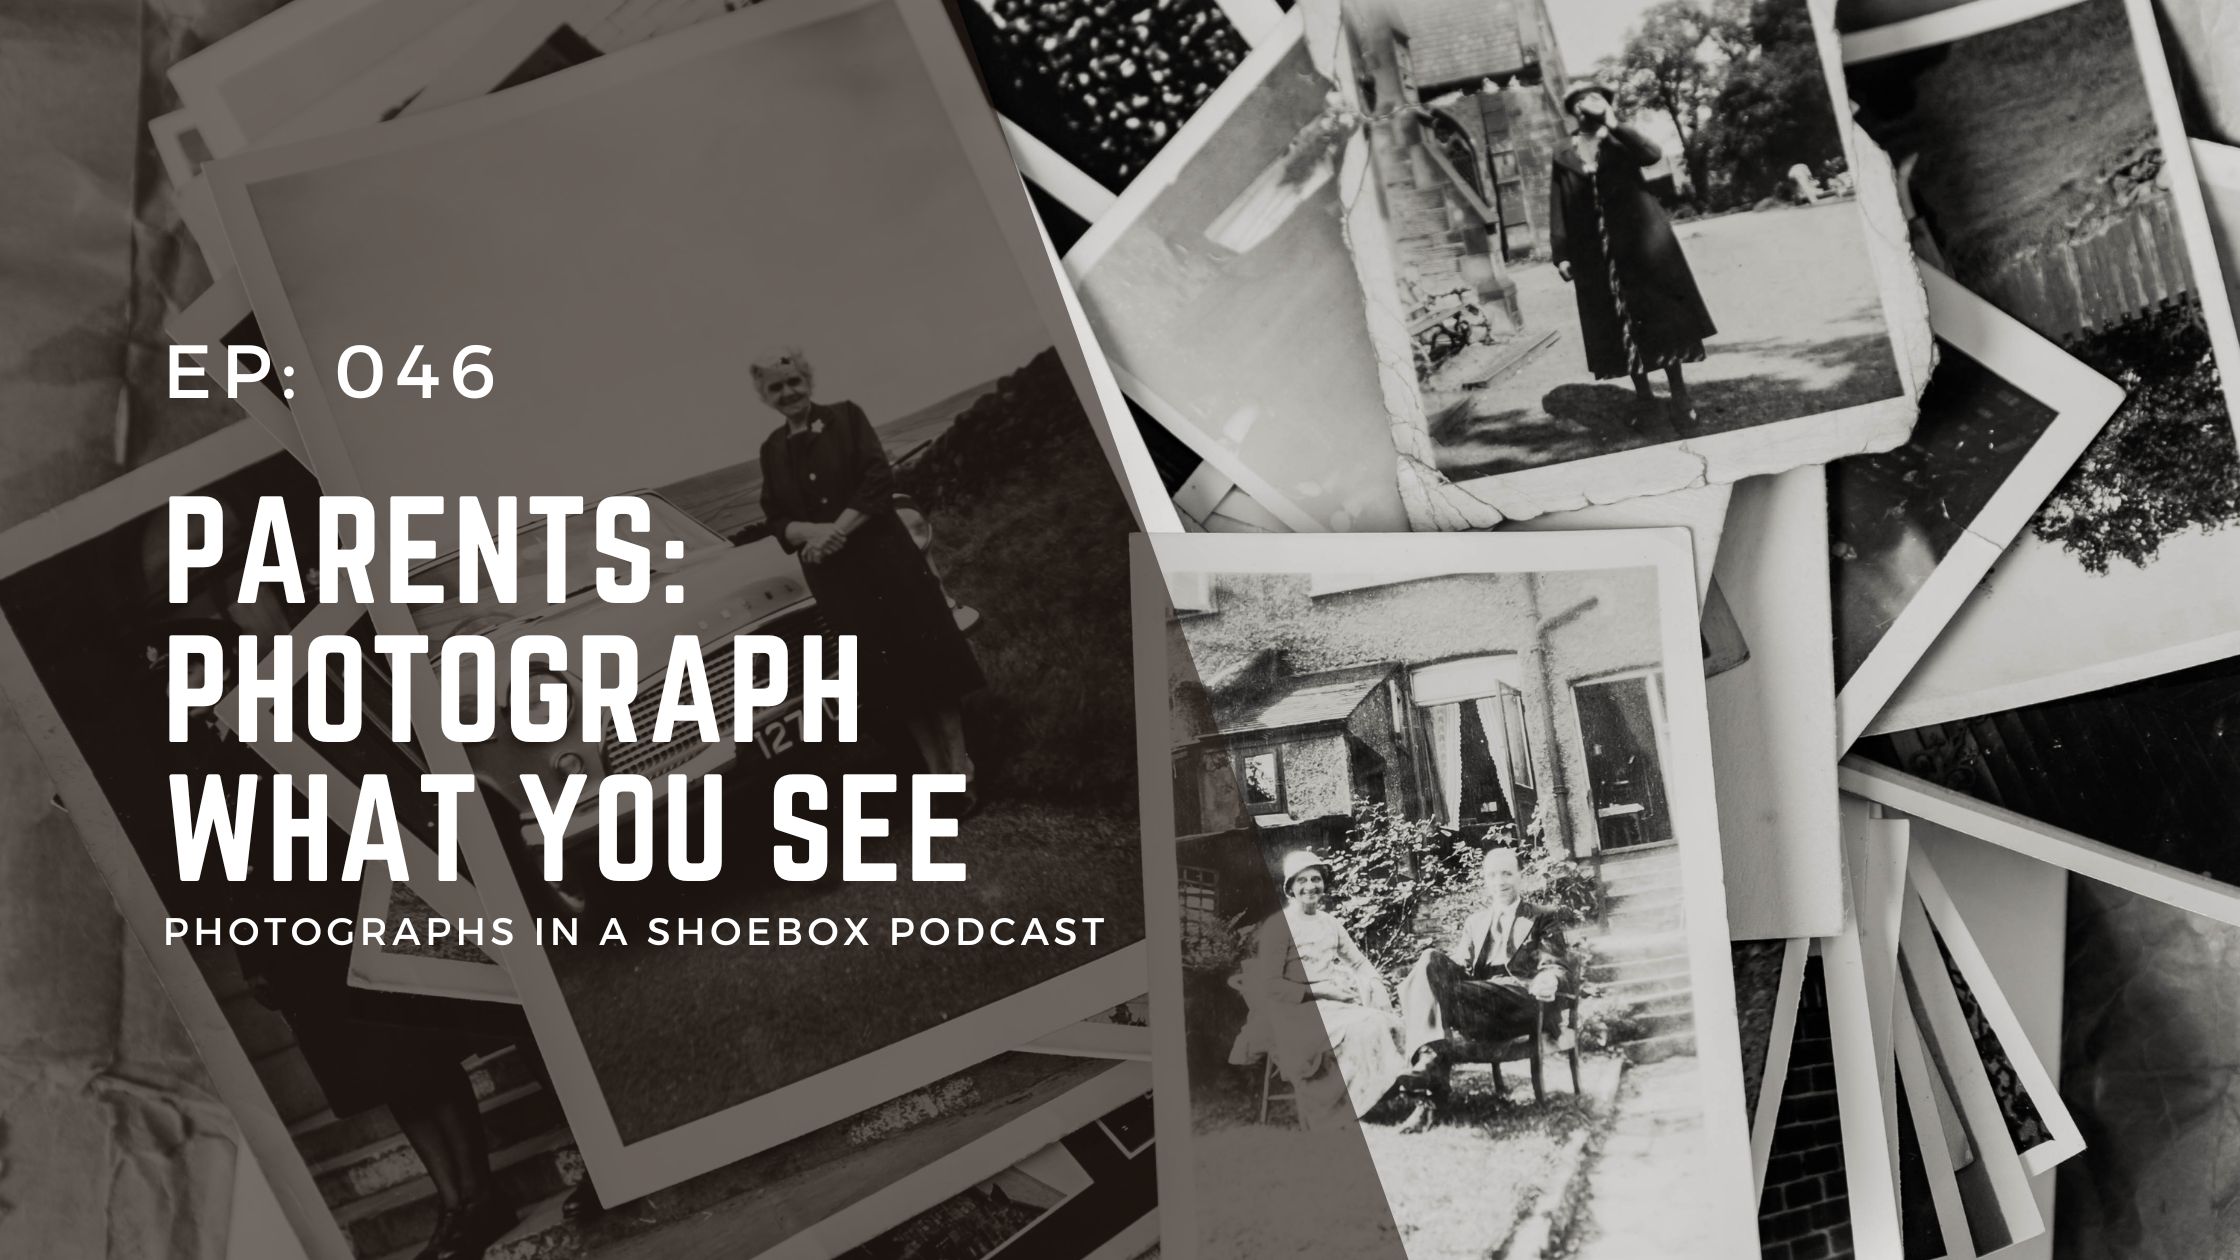 Podcast artwork for episode 046, parents, I encourage you to photograph what you see